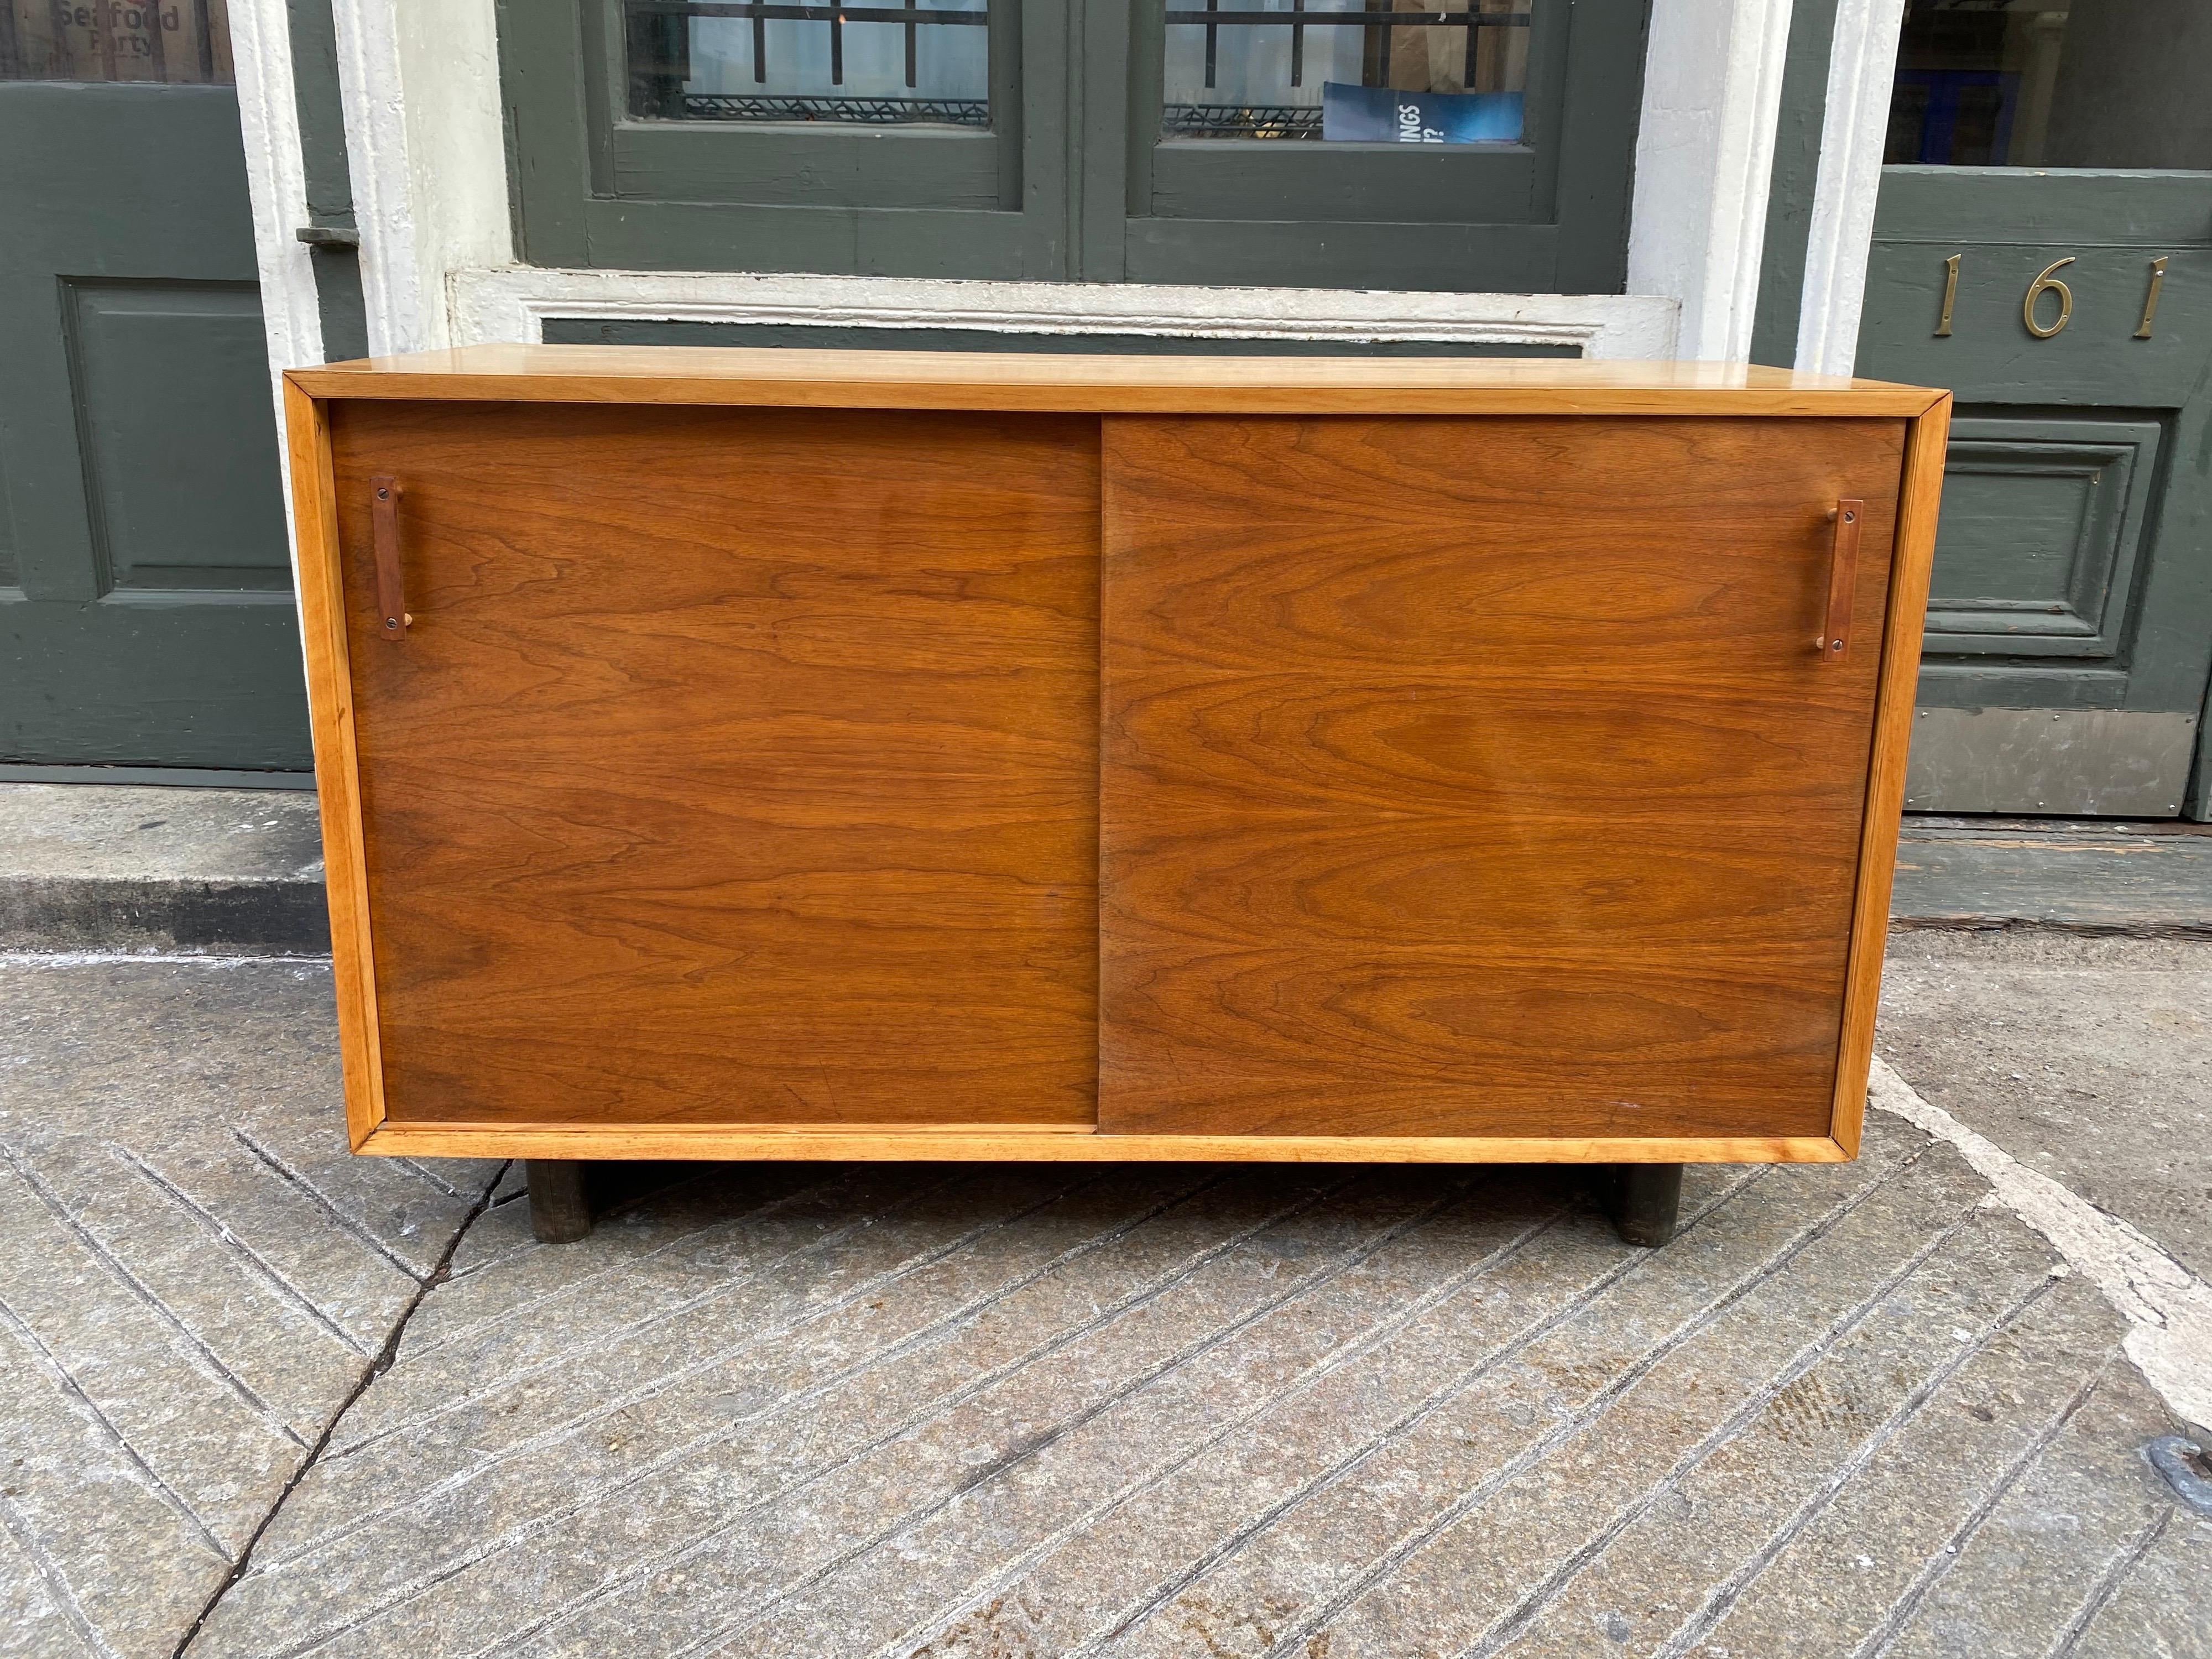 Designcraft sliding 2-door cabinet with a birch outer cabinet and walnut doors. Doors slide open to 1 shelf on each side. Original condition shows normal wear, slight shadow to top where something sat. Two plinth legs support the cabinet. Unusual